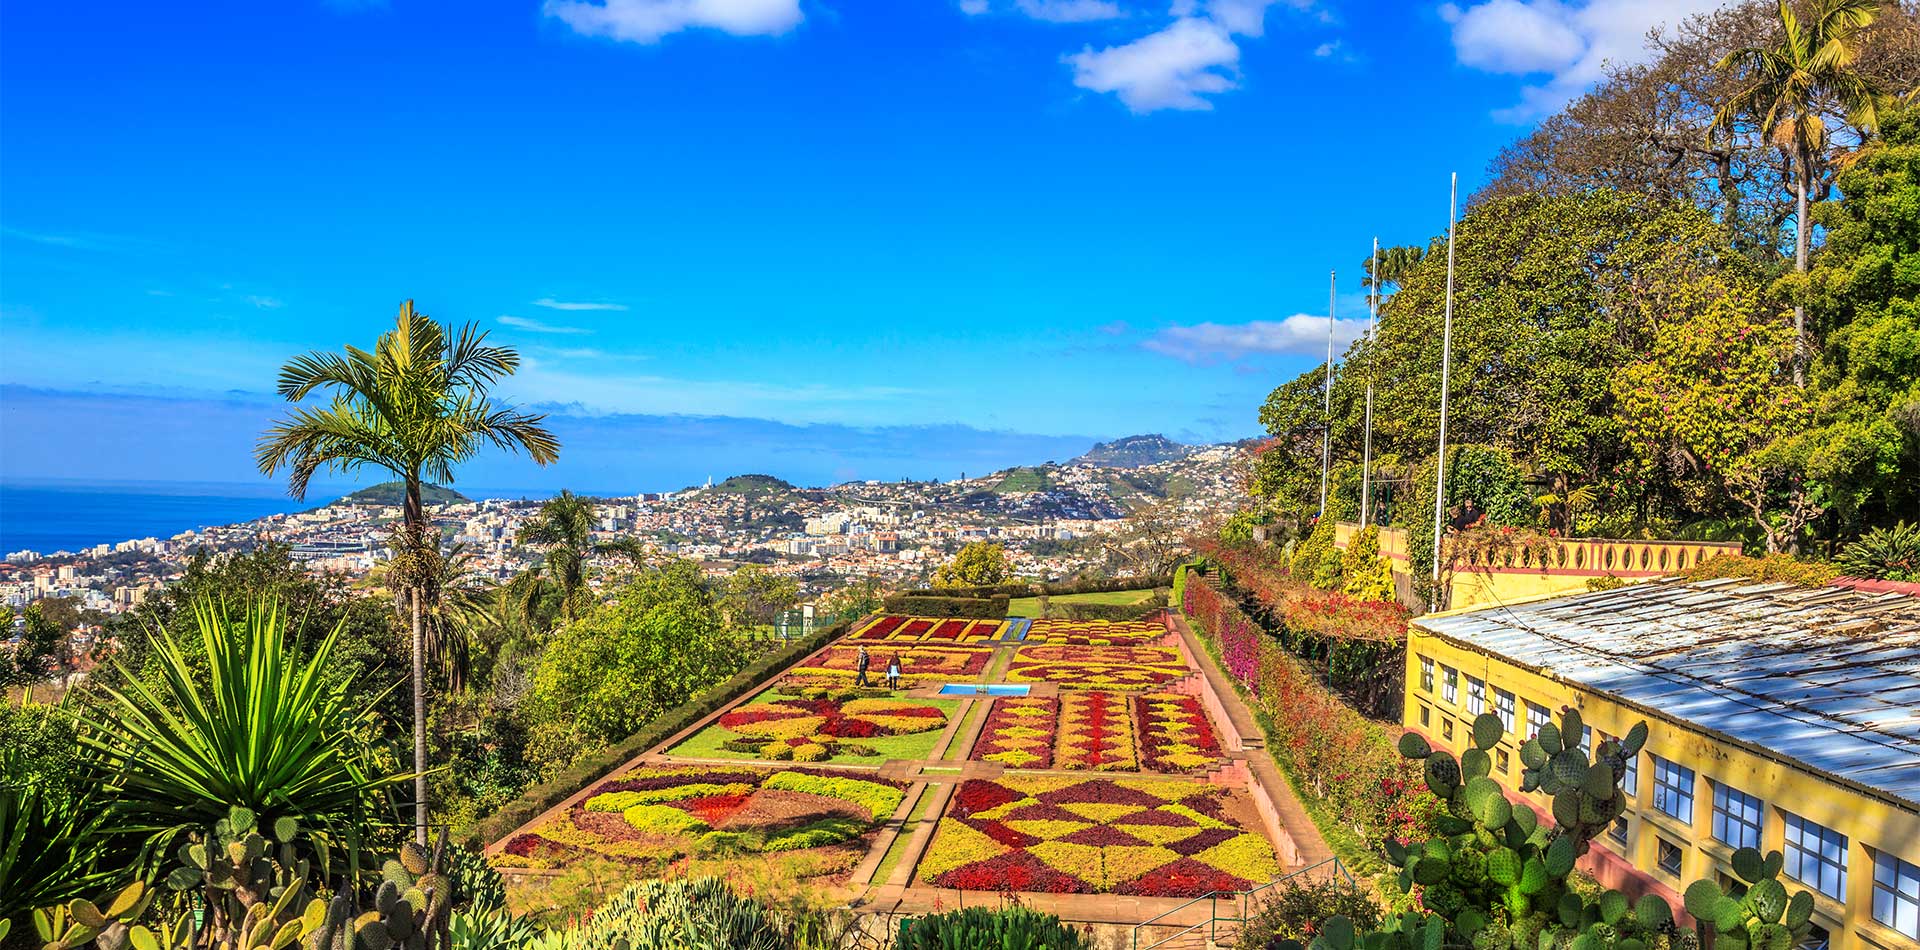 Tropical gardens in Funchal, Madeira